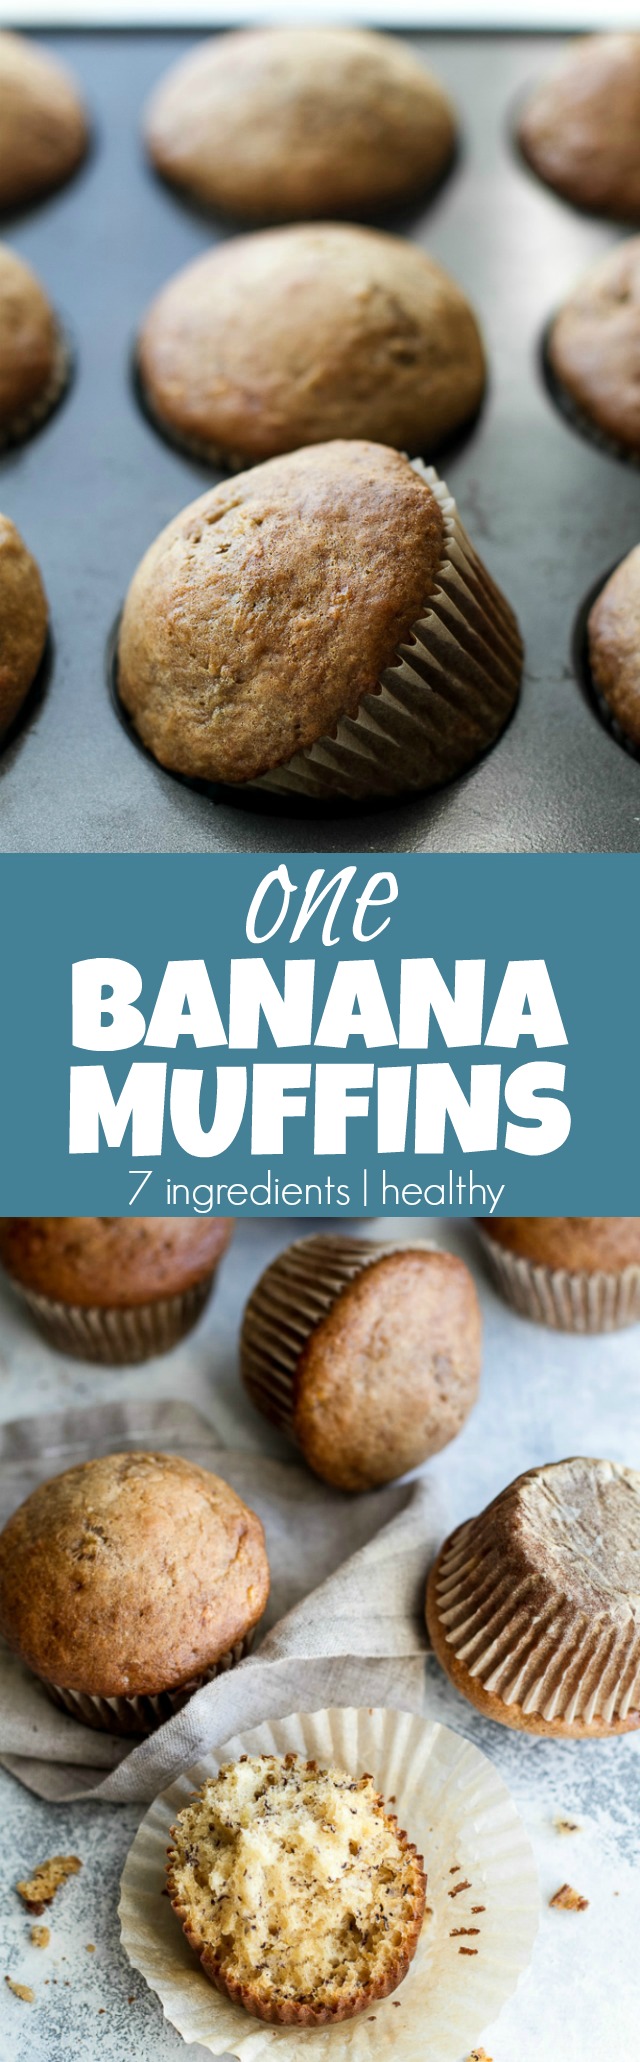 Healthy one banana muffins to help you use up that last overripe banana! These tender oil-free muffins are made with just 7 ingredients and make a healthy breakfast or snack! | runningwithspoons.com